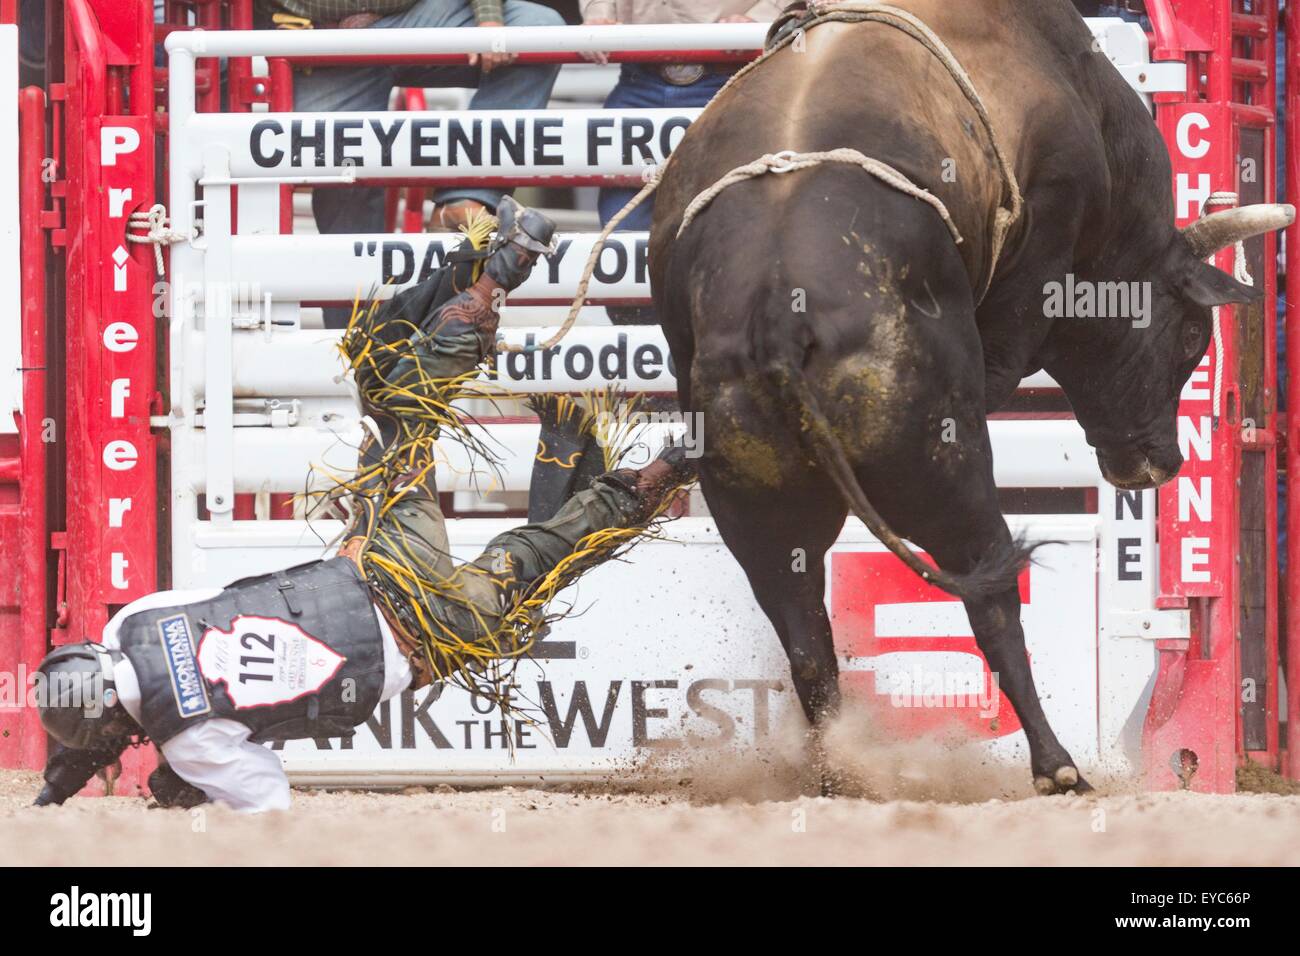 Cheyenne, Wyoming, USA. 26th July, 2015. Bull rider Lon Danley is tossed from his bull during the Bull Riding finals at the Cheyenne Frontier Days rodeo in Frontier Park Arena July 26, 2015 in Cheyenne, Wyoming. Frontier Days celebrates the cowboy traditions of the west with a rodeo, parade and fair. Stock Photo